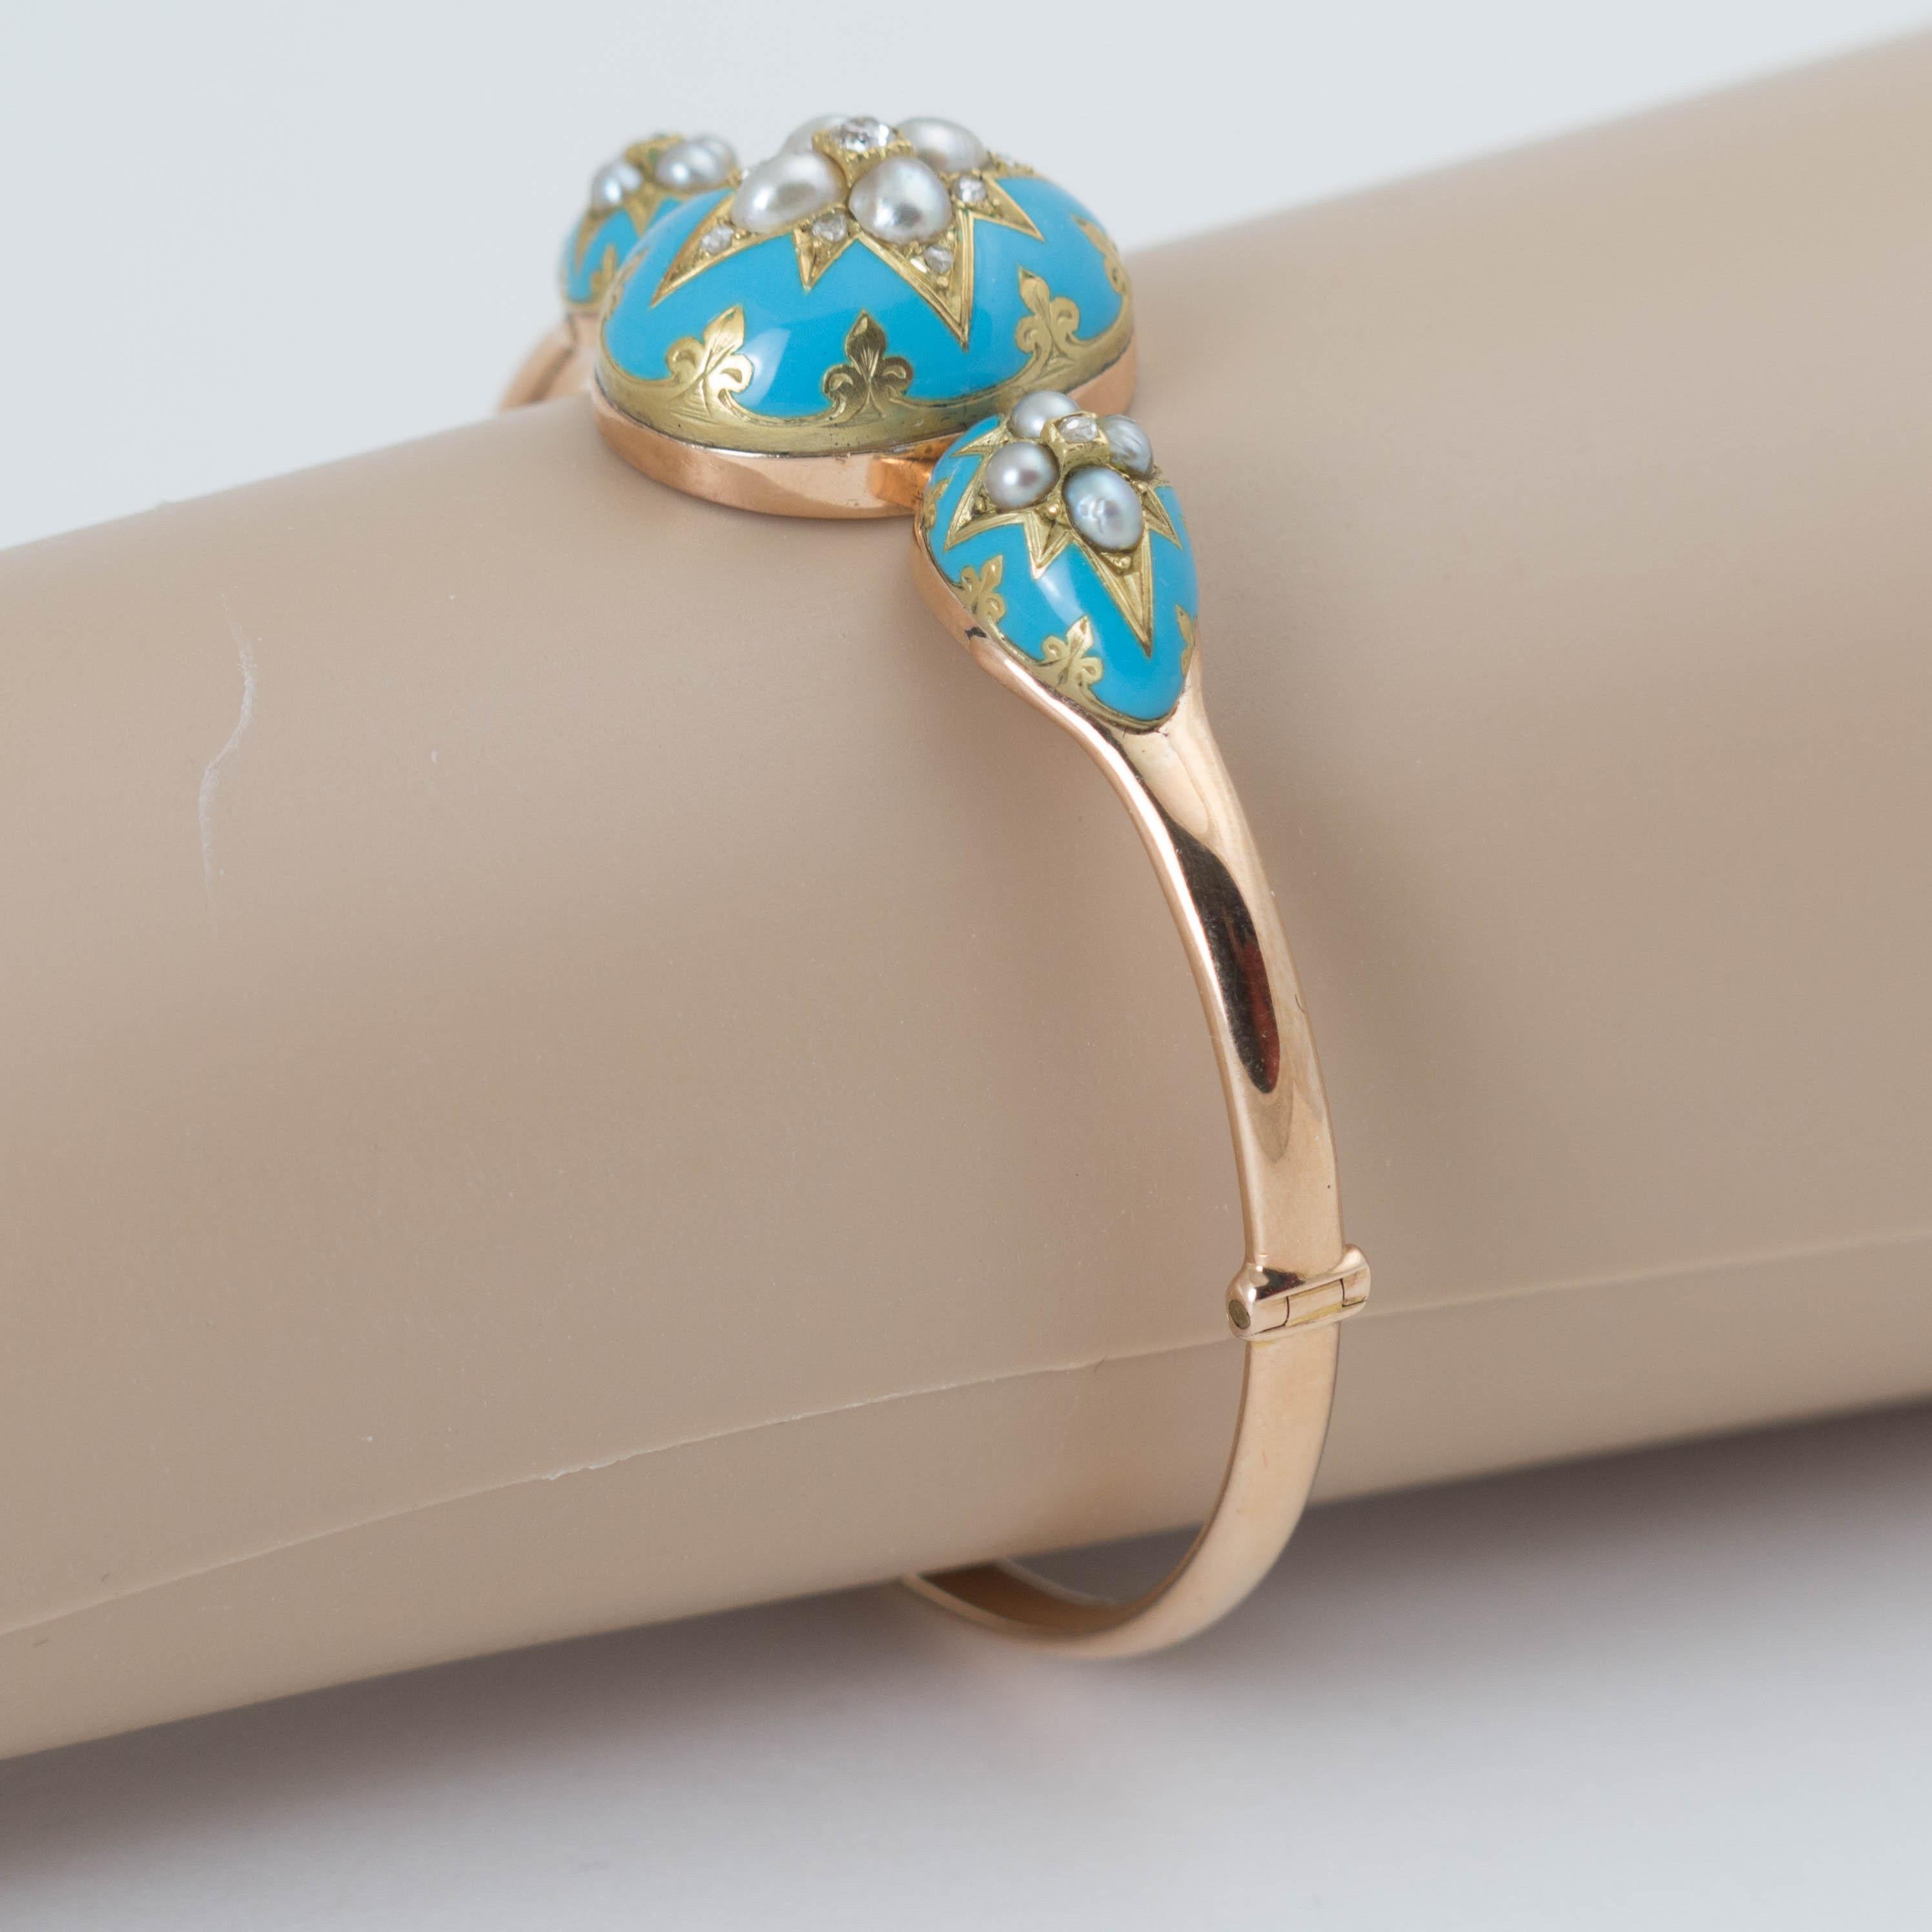 Women's Antique Victorian Turquoise Blue Enamel Gold Bracelet with Diamonds and Pearls For Sale